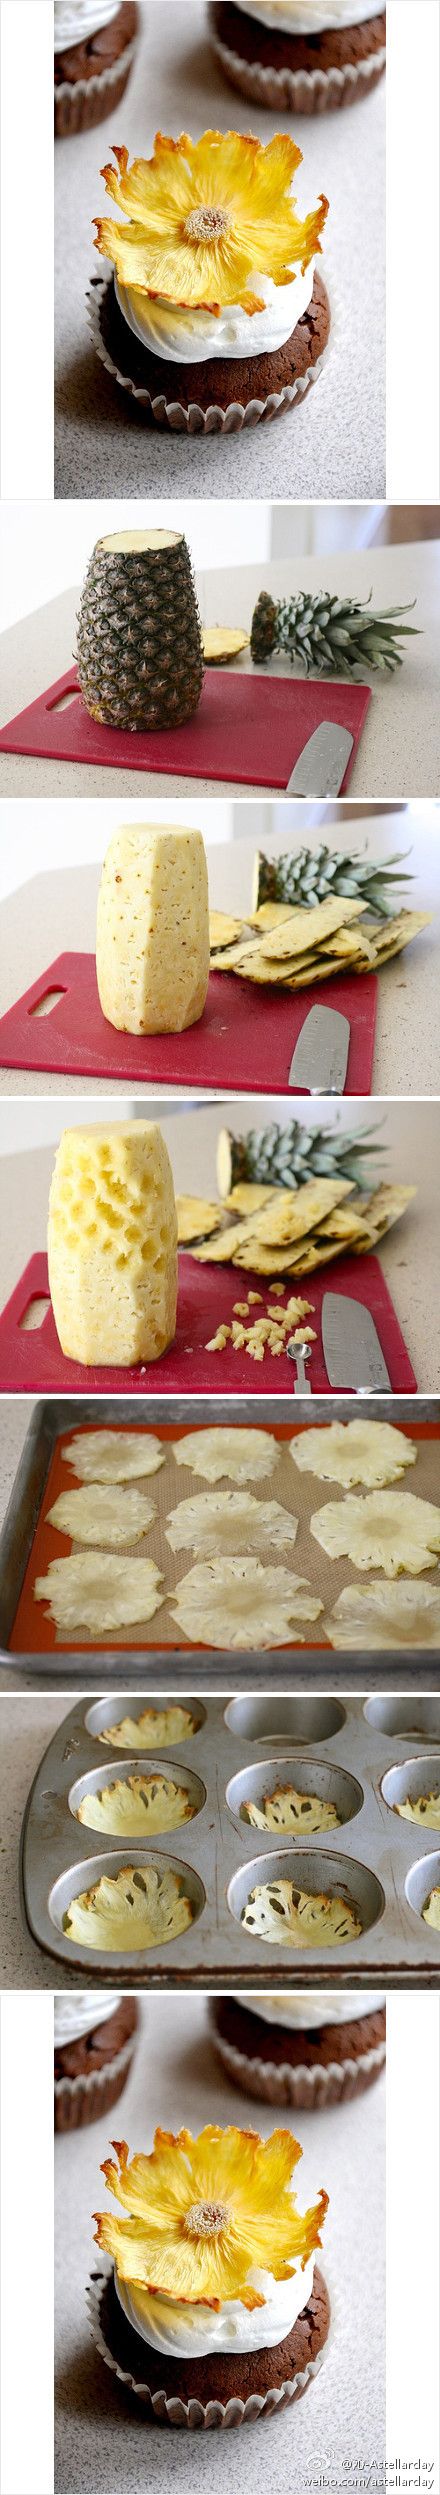 How to make decorative Pineapple “flowers.”  Fun idea to top cupcakes!